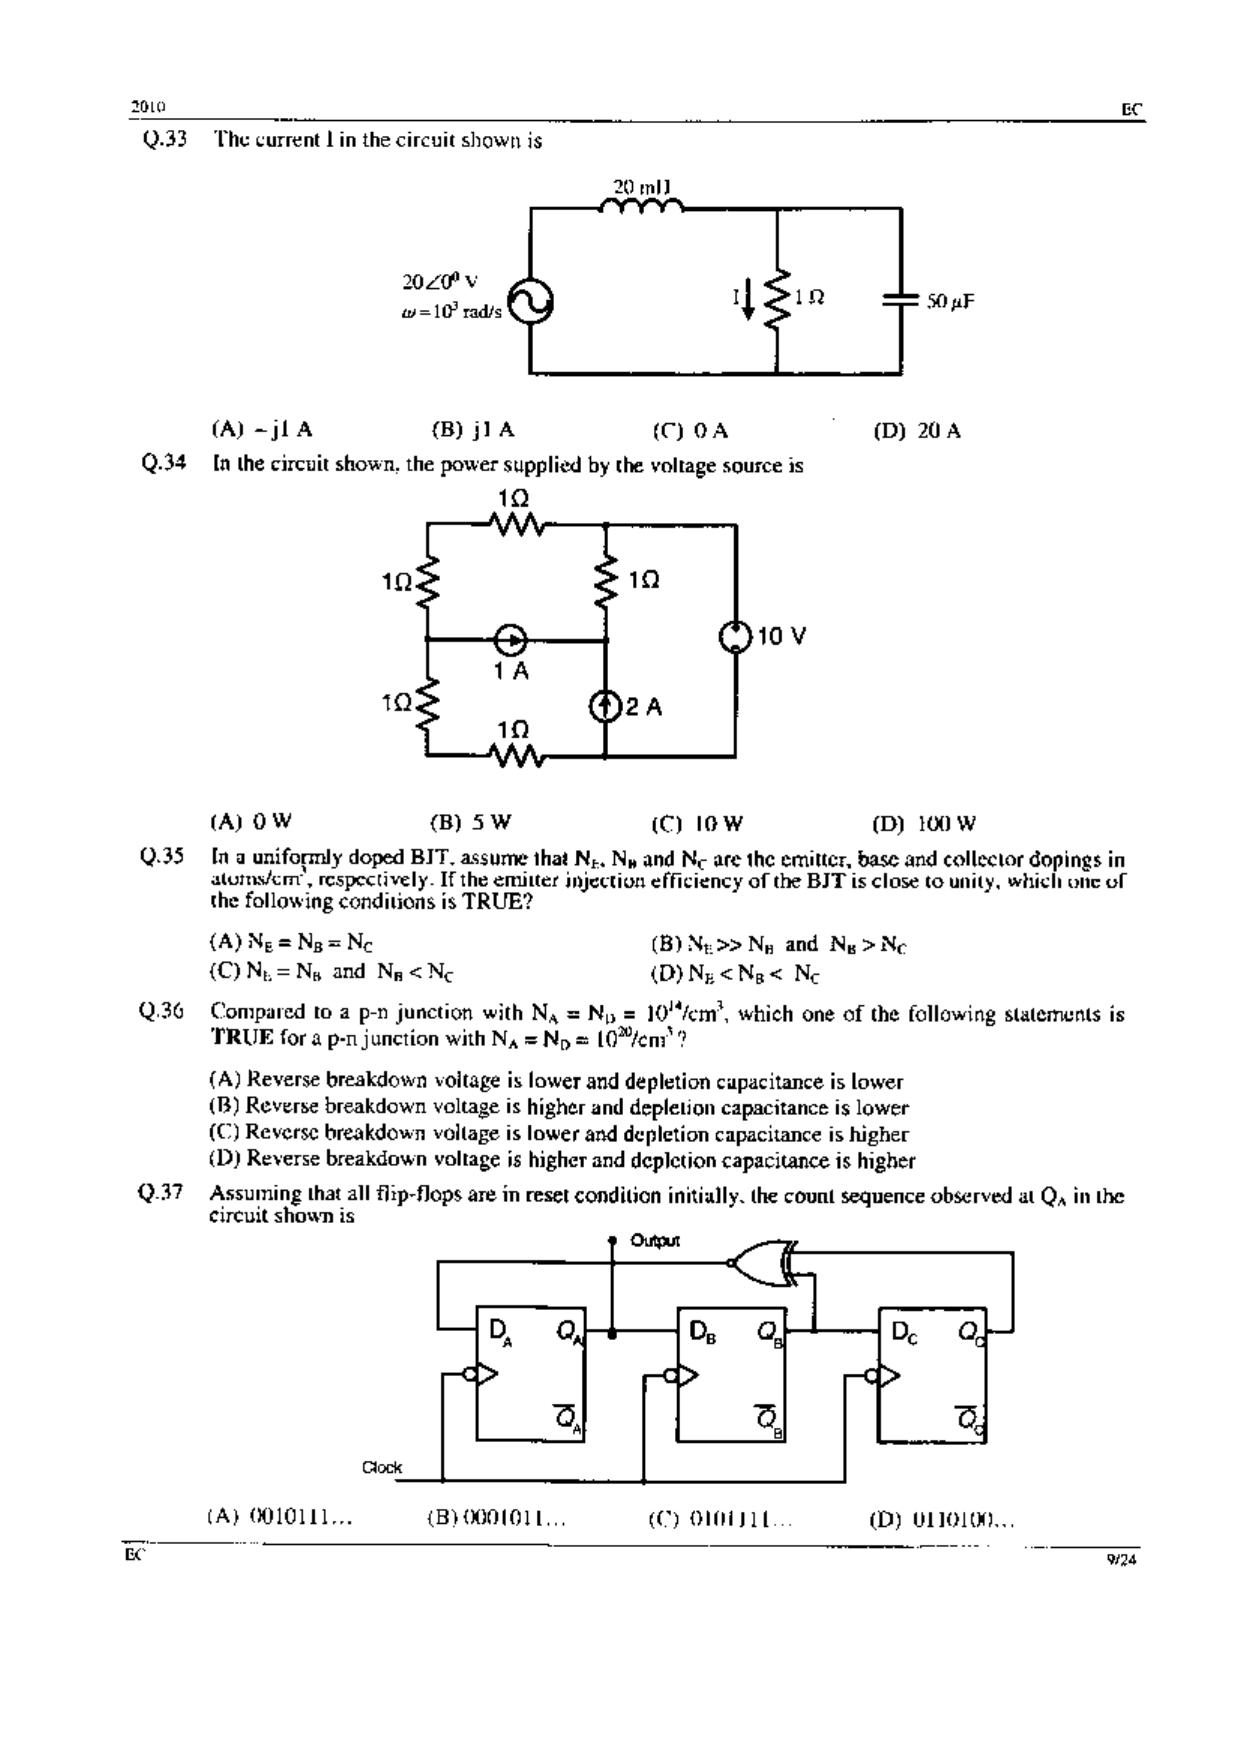 GATE 2010 Electronics and Communication Engineering (EC) Question Paper with Answer Key - Page 9